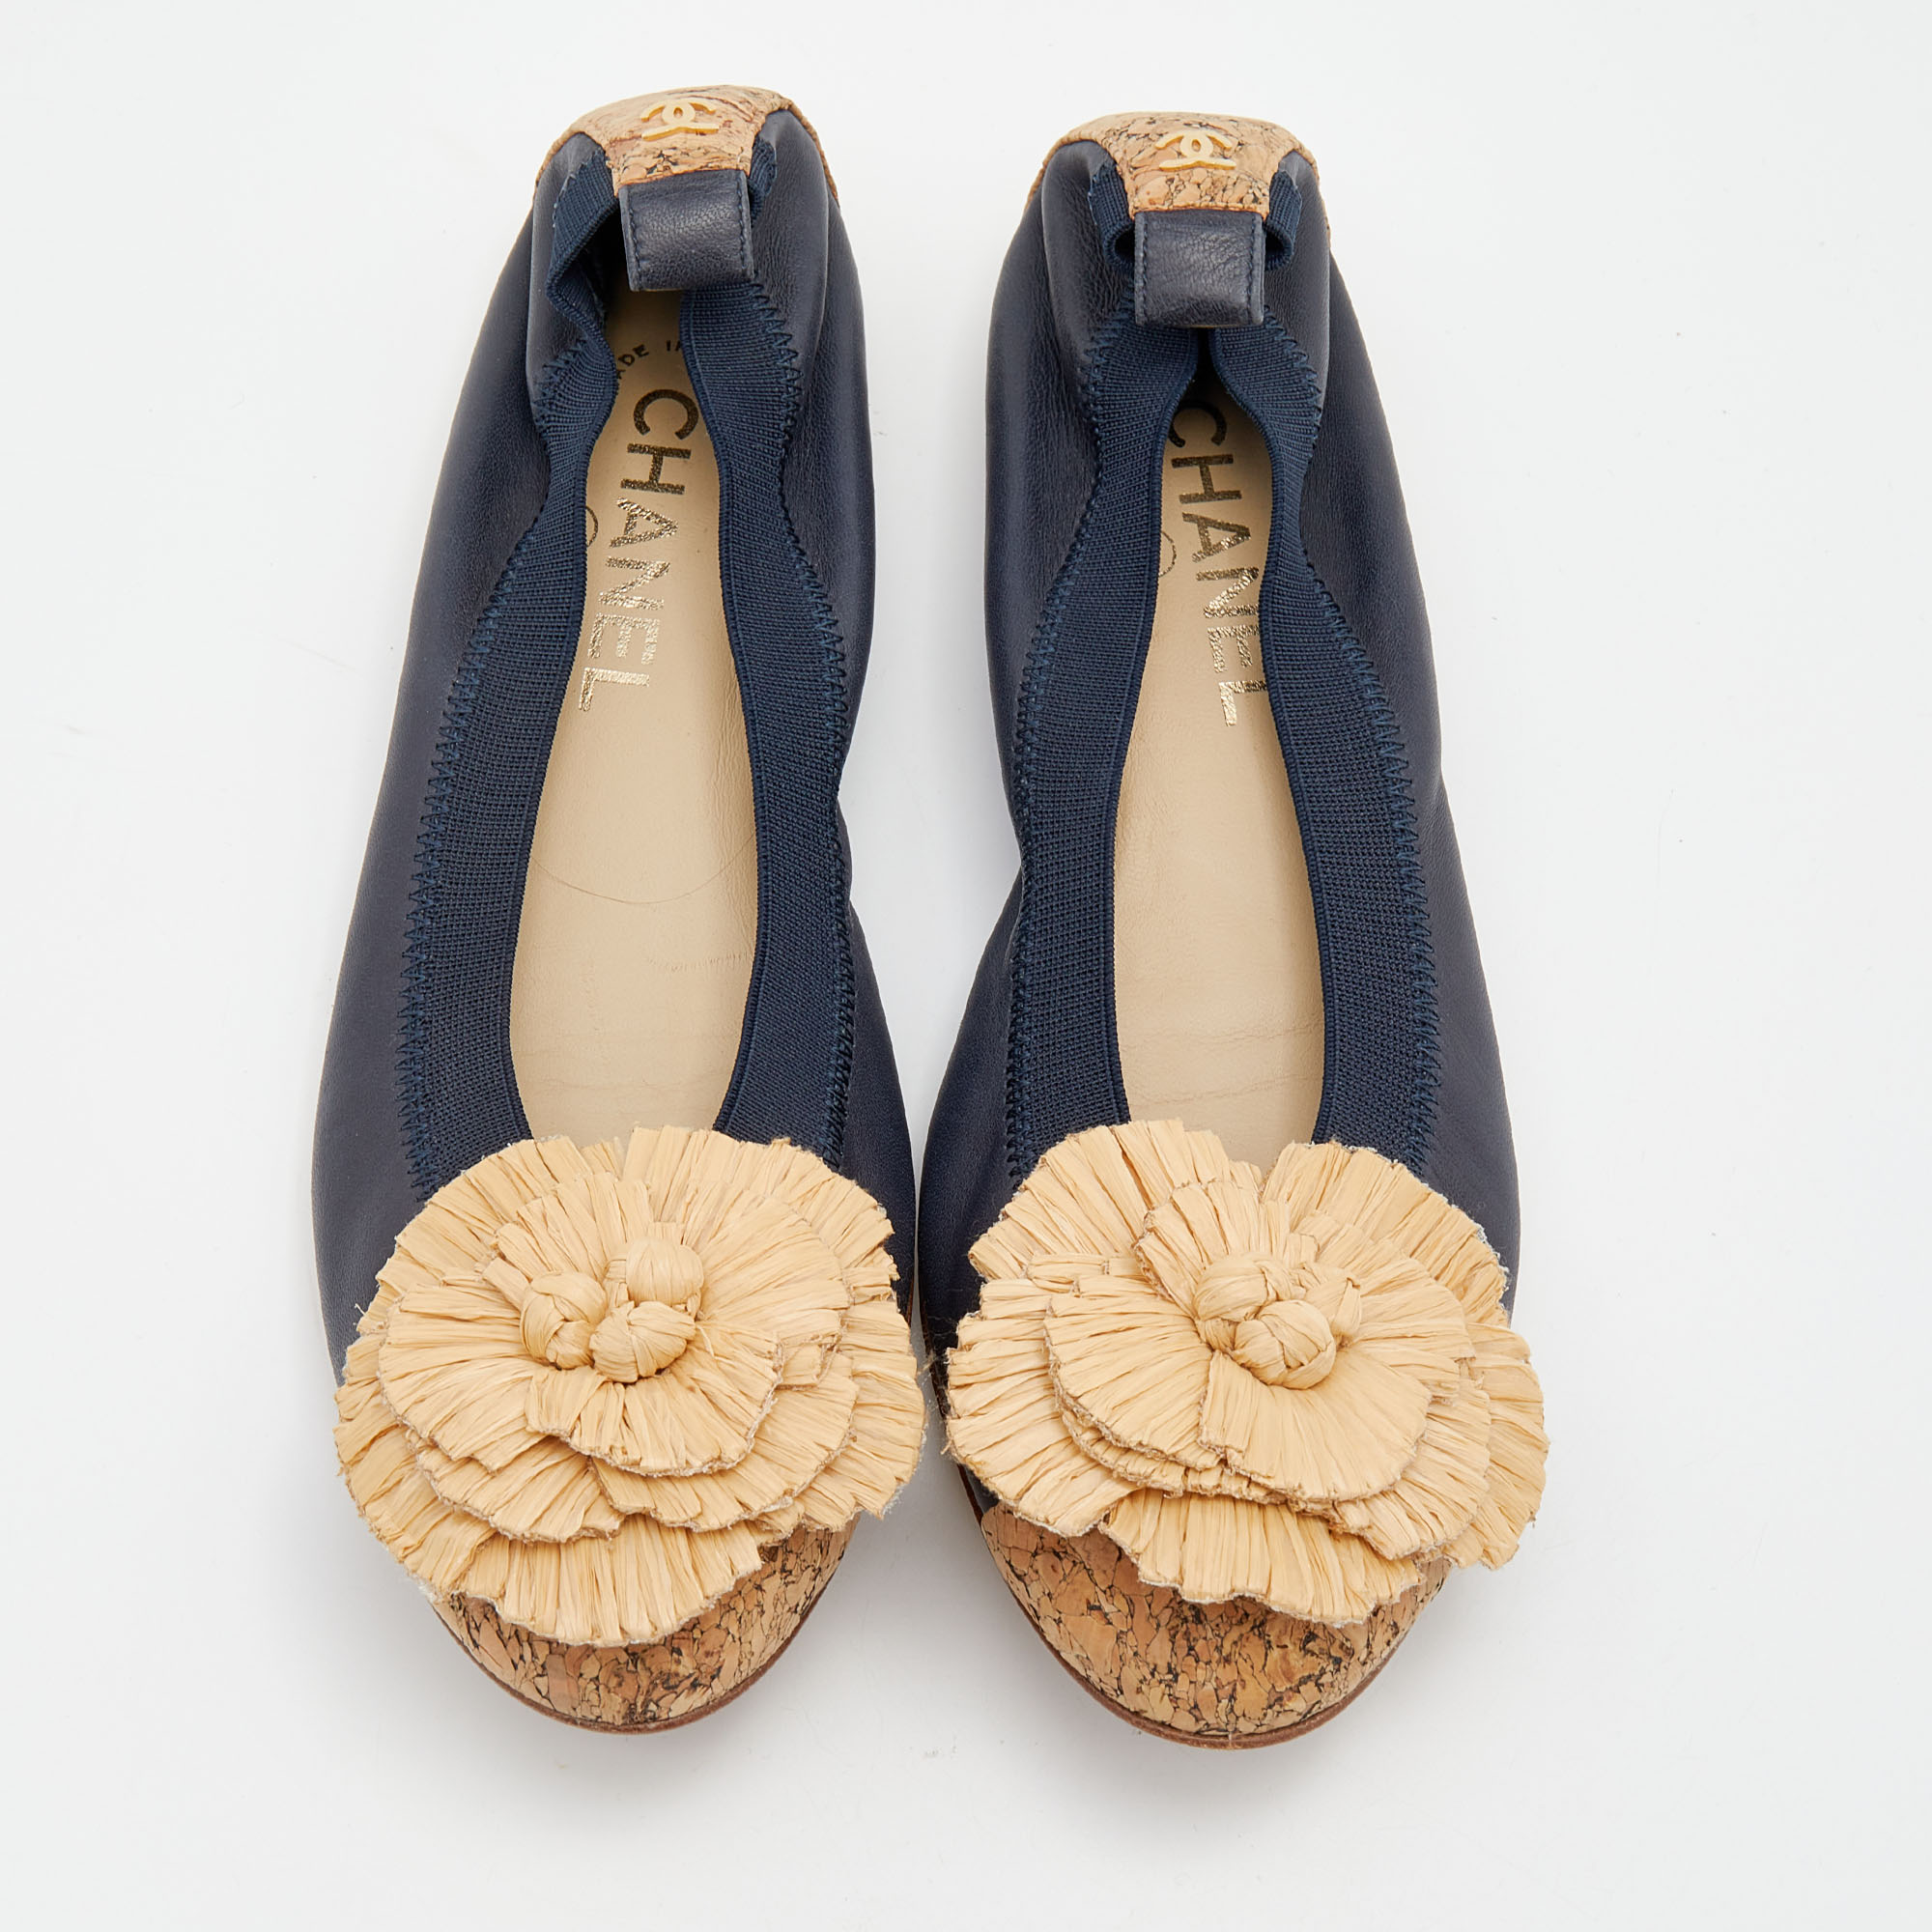 Chanel Navy Blue/Beige Leather And Straw Camellia Ballet Flats Size 38